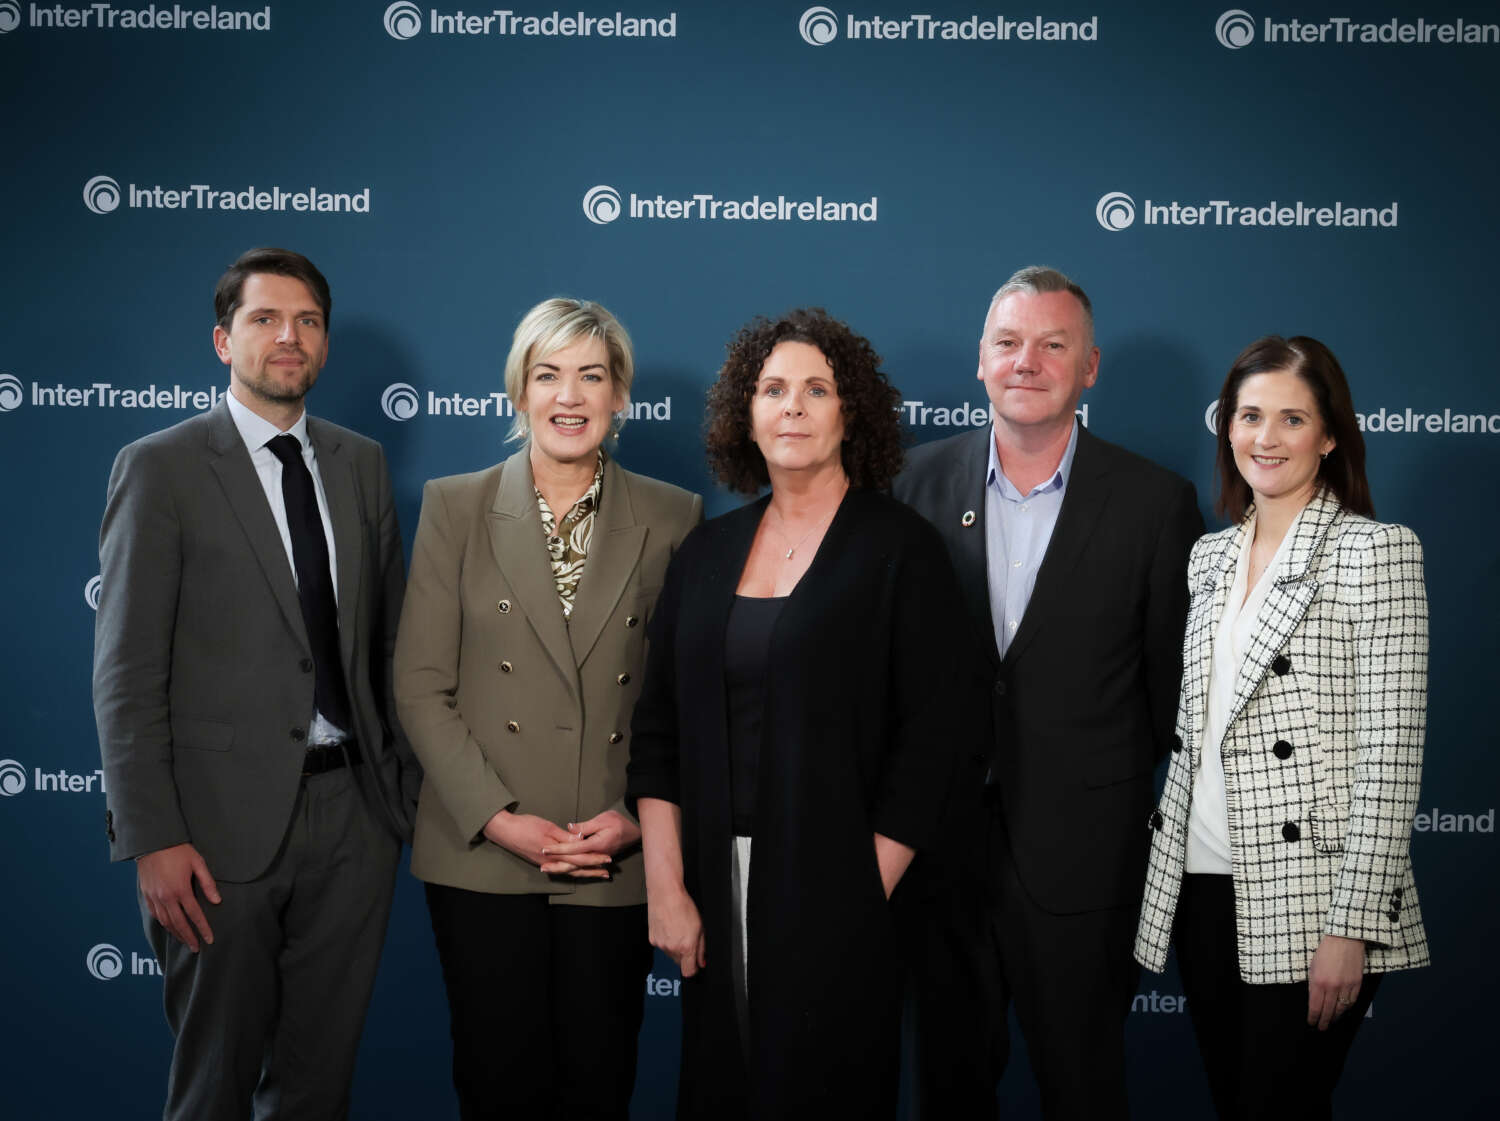 Pictured at Inter Trade Irelands offices in Newry Co Down are L R Stuart Mathieson Research Manager Inter Trade Ireland Margaret Hearty CEO Inter Trade Ireland Brenda Burke Director at the Department for the Economy